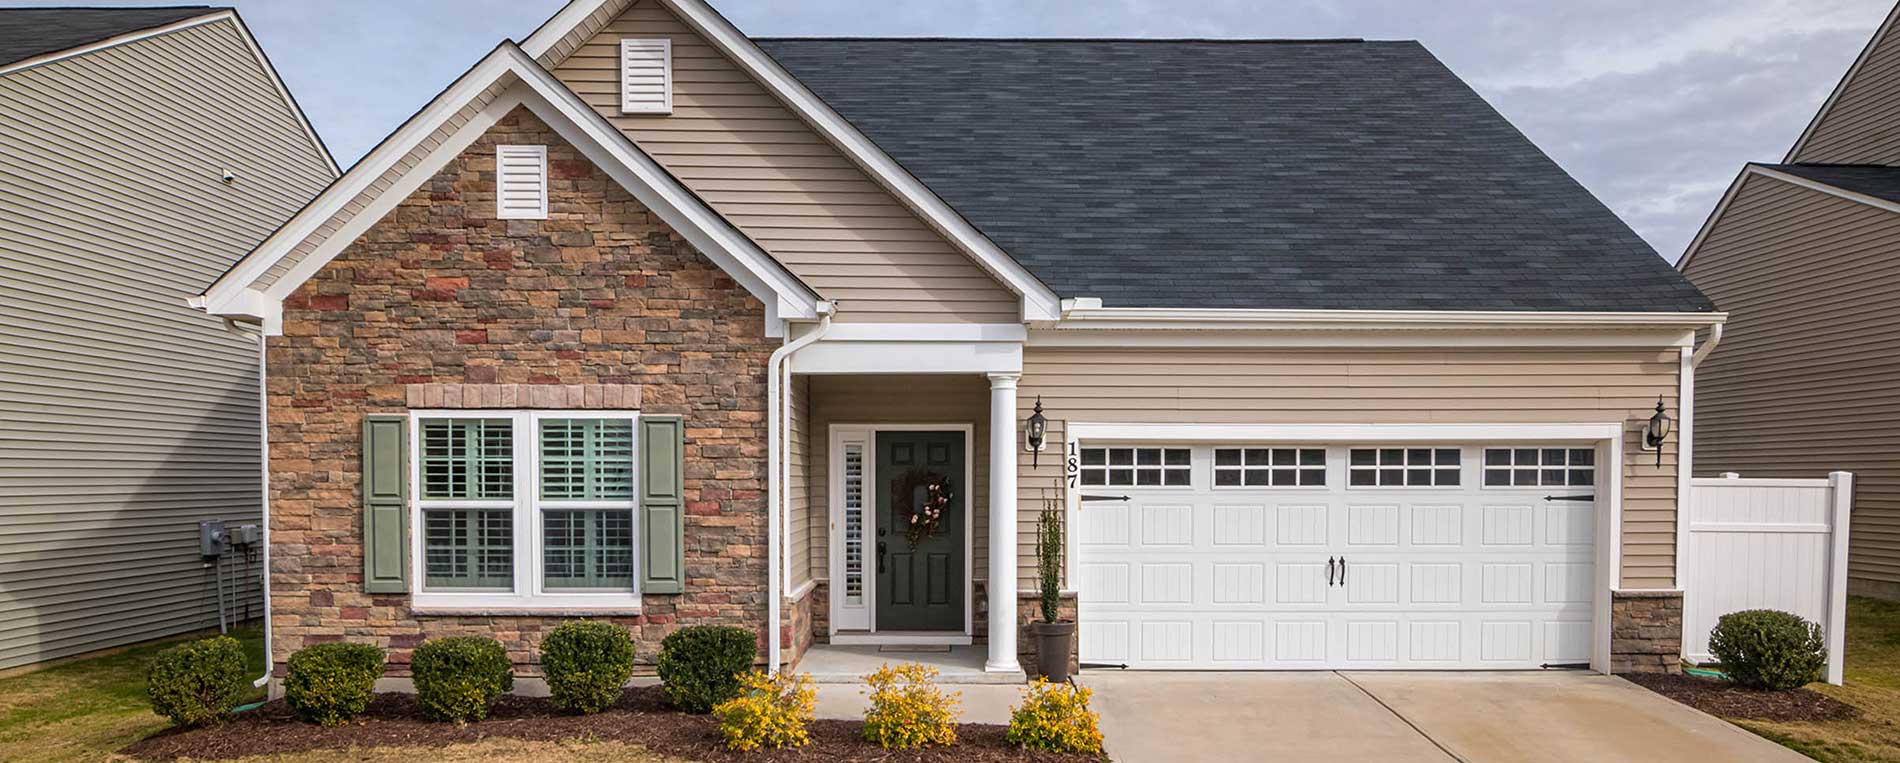 How To Keep Your Garage Door Operating Safely